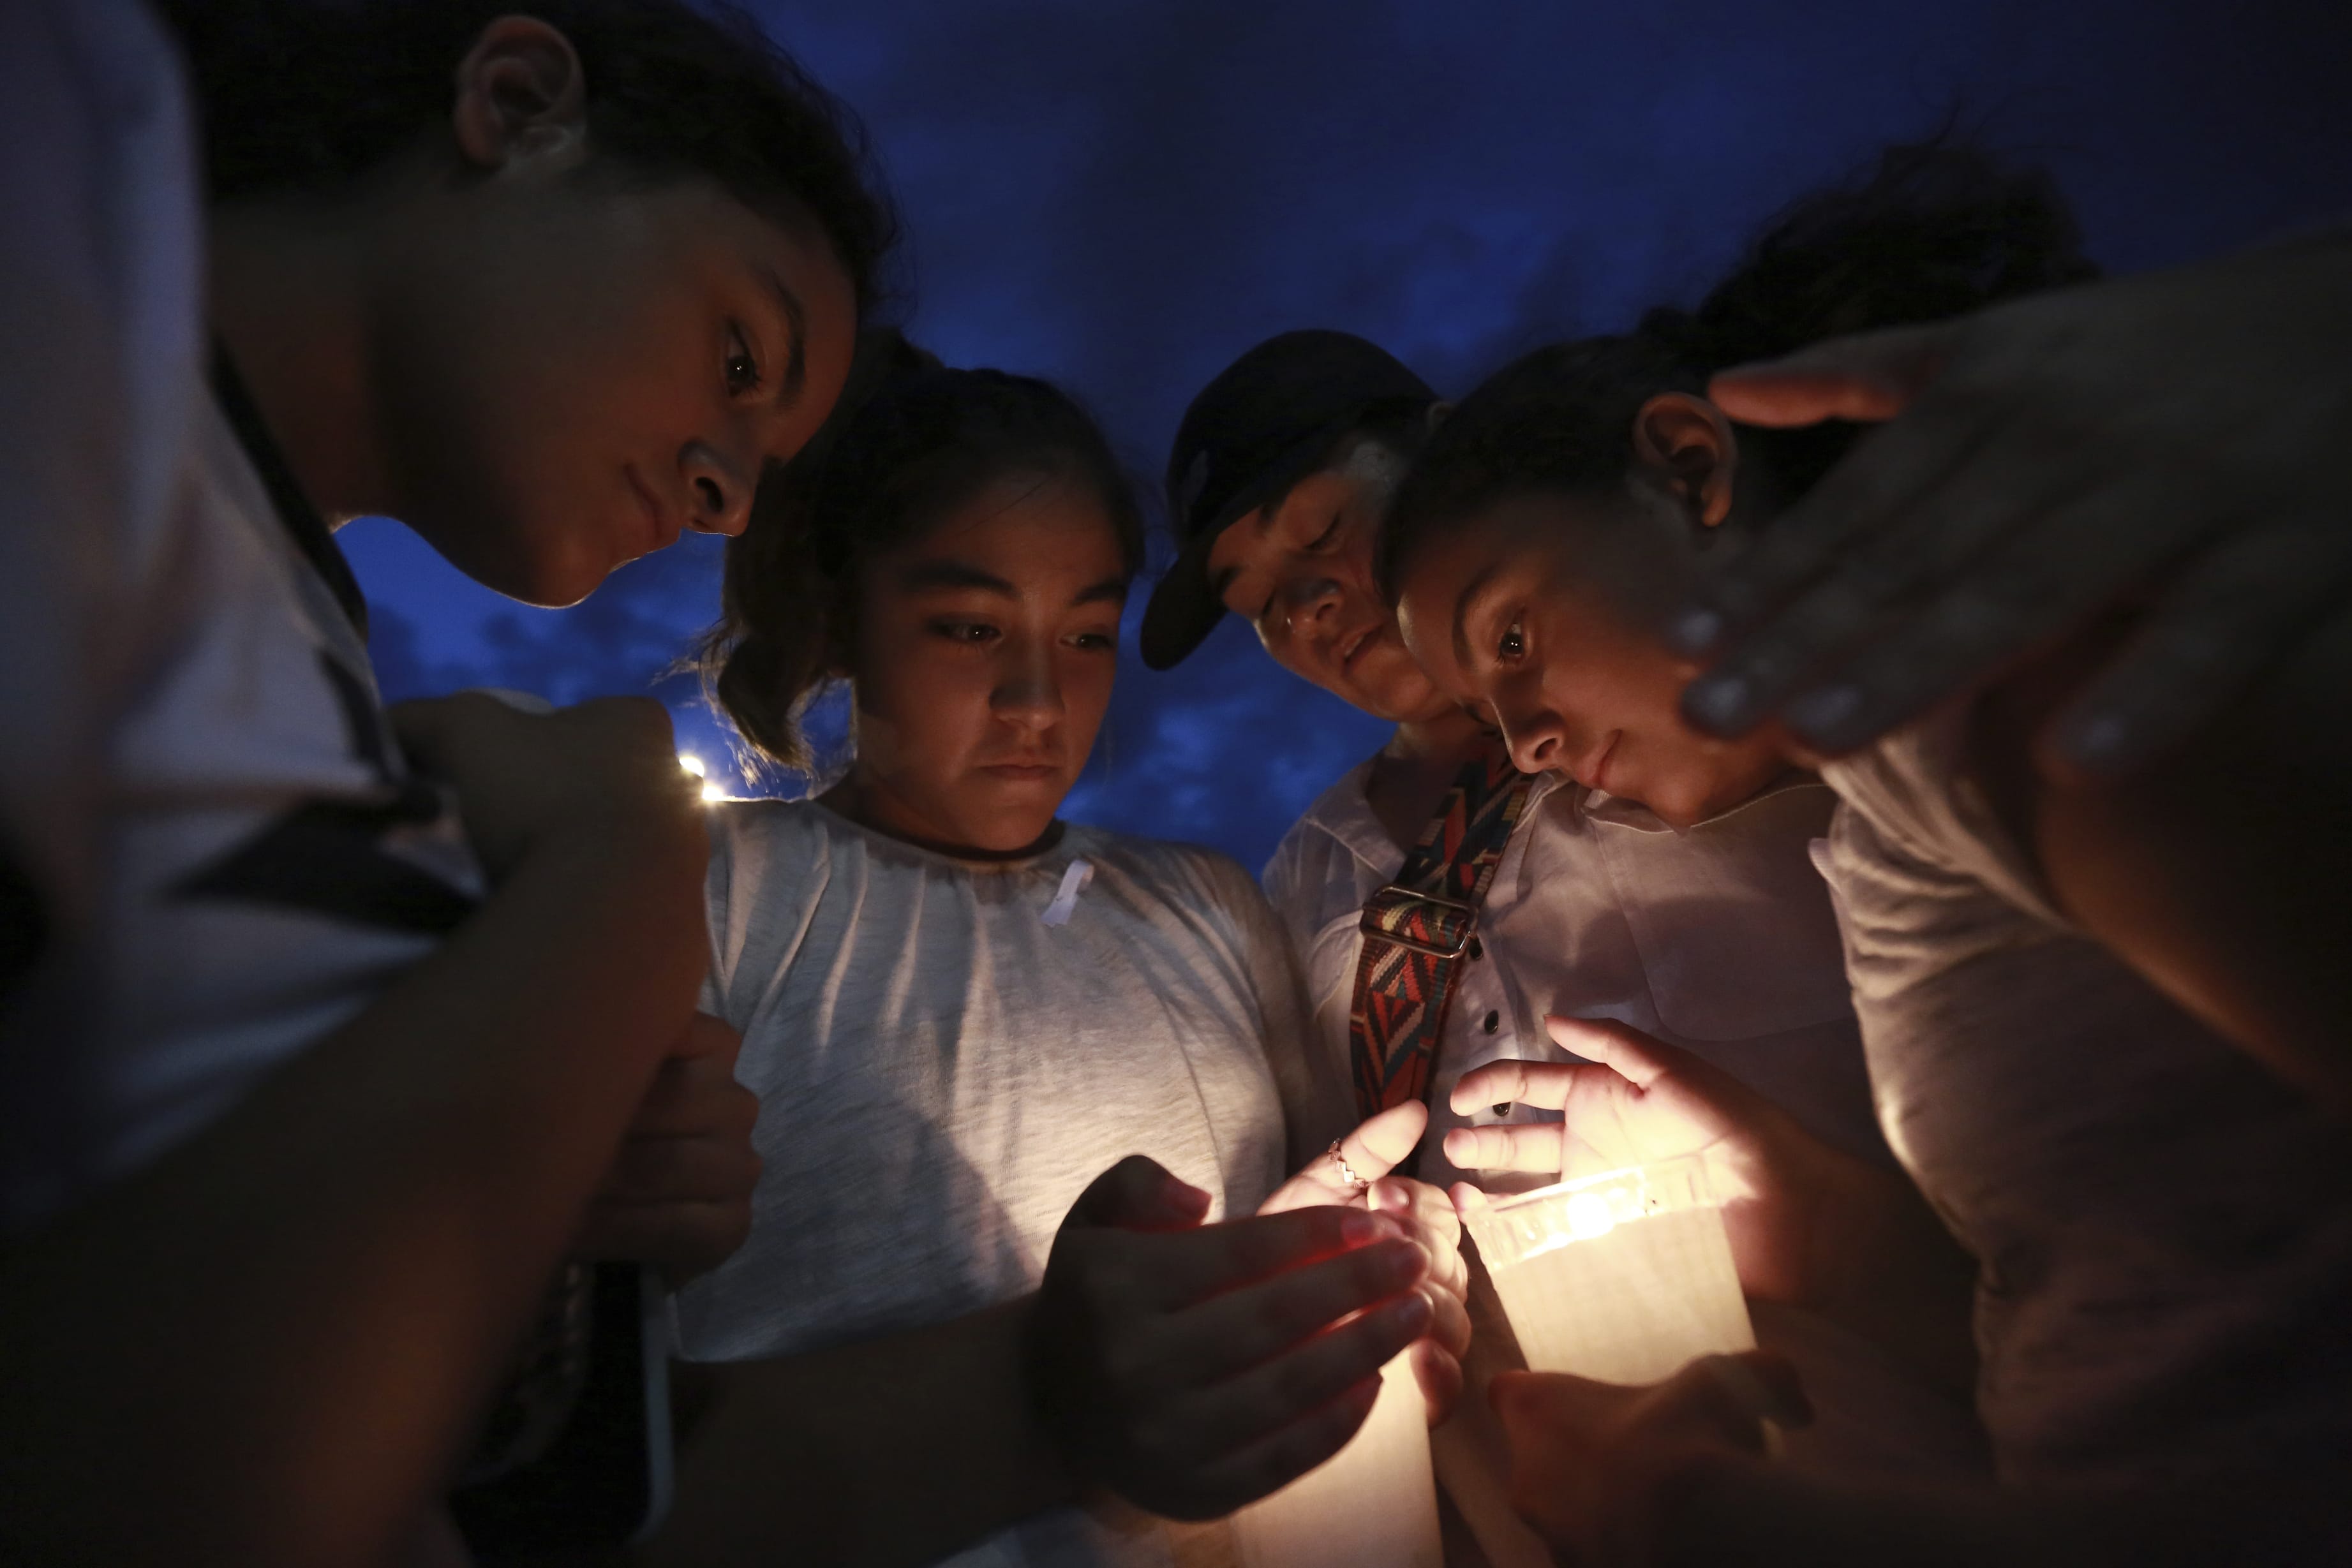 People gather in Juarez, Mexico, Saturday, Aug. 3, 2019, in a vigil for the 3 Mexican nationals who were killed in an El Paso shopping-complex shooting. Twenty people were killed and more than two dozen injured in a shooting Saturday in a busy shopping area in the Texas border town of El Paso, the state’s governor said.